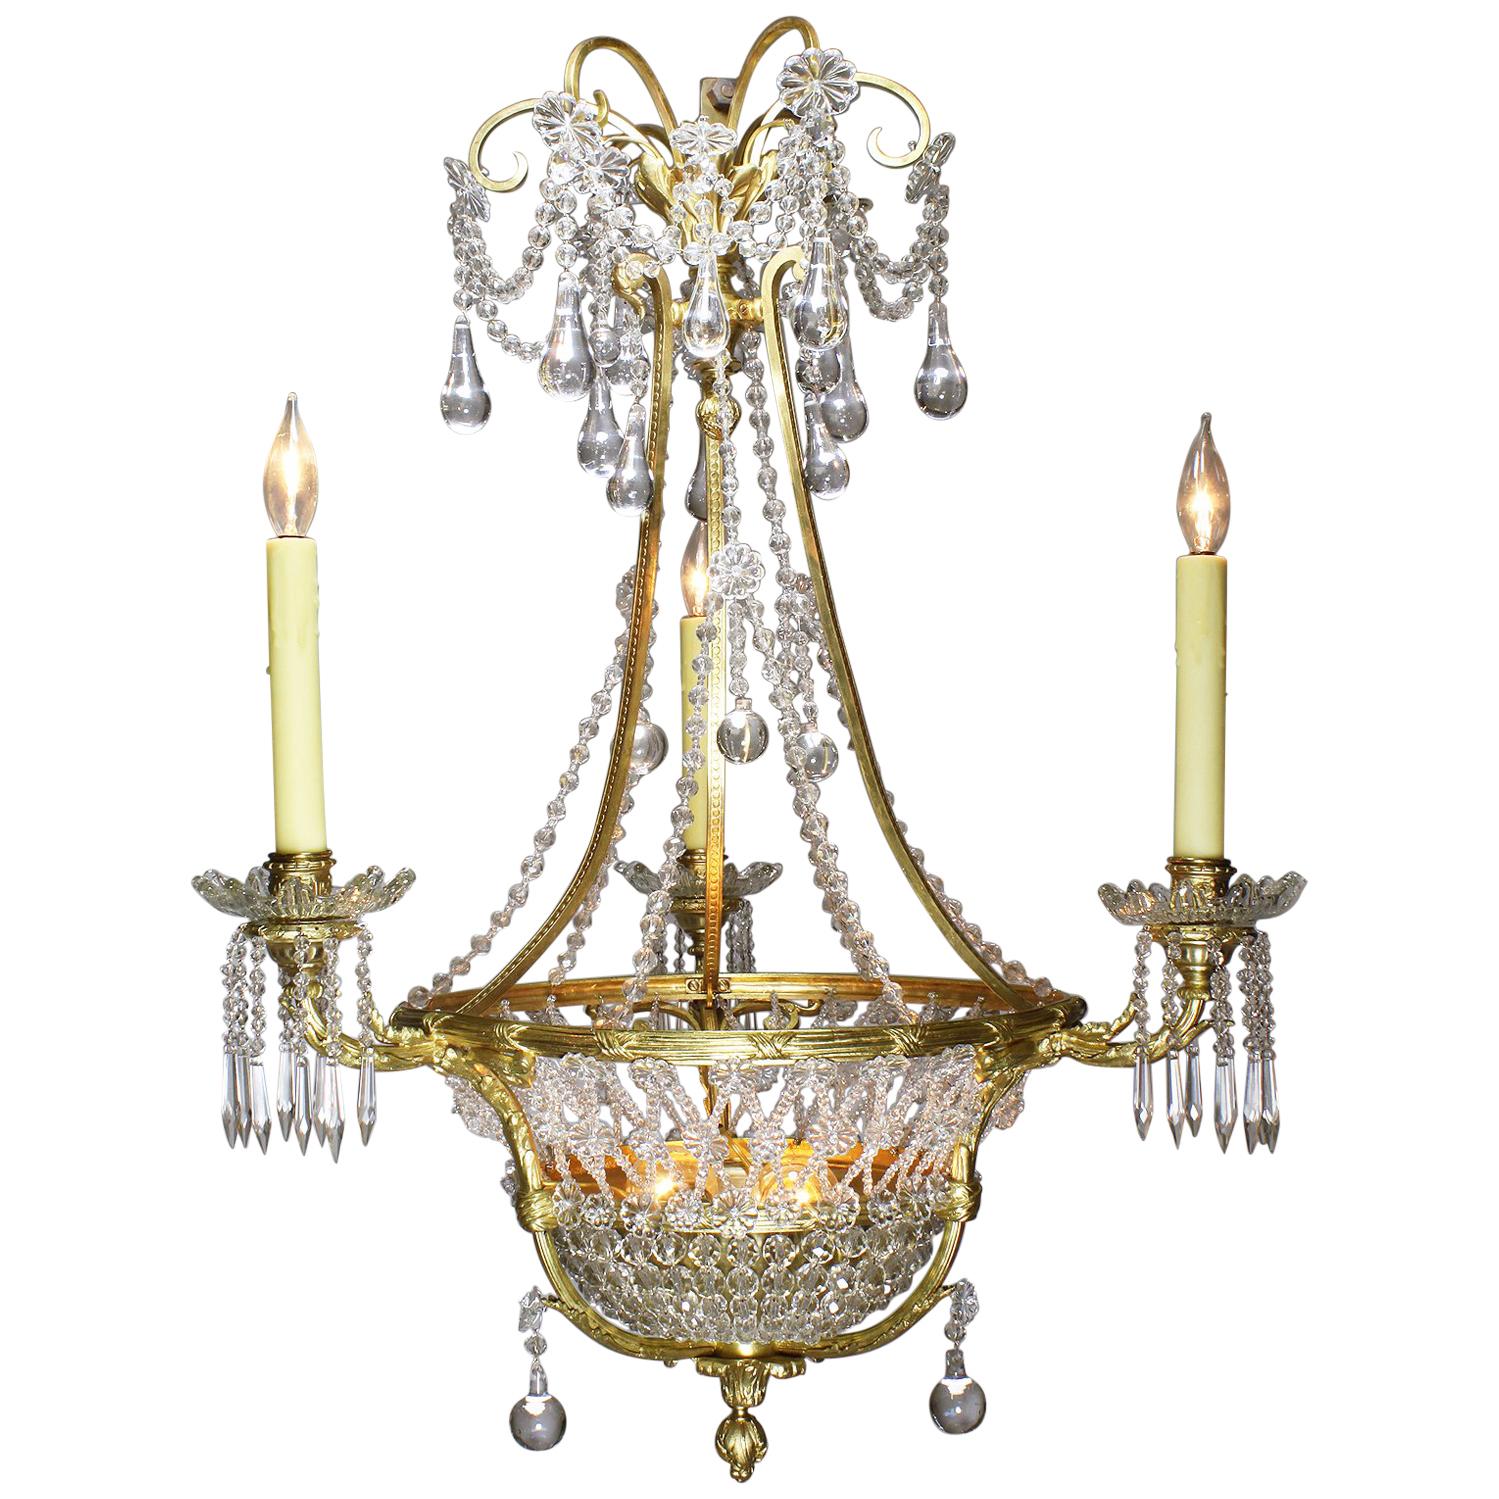 Fine French Belle Époque 19th-20th Century Gilt-Bronze and Cut-Glass Chandelier For Sale